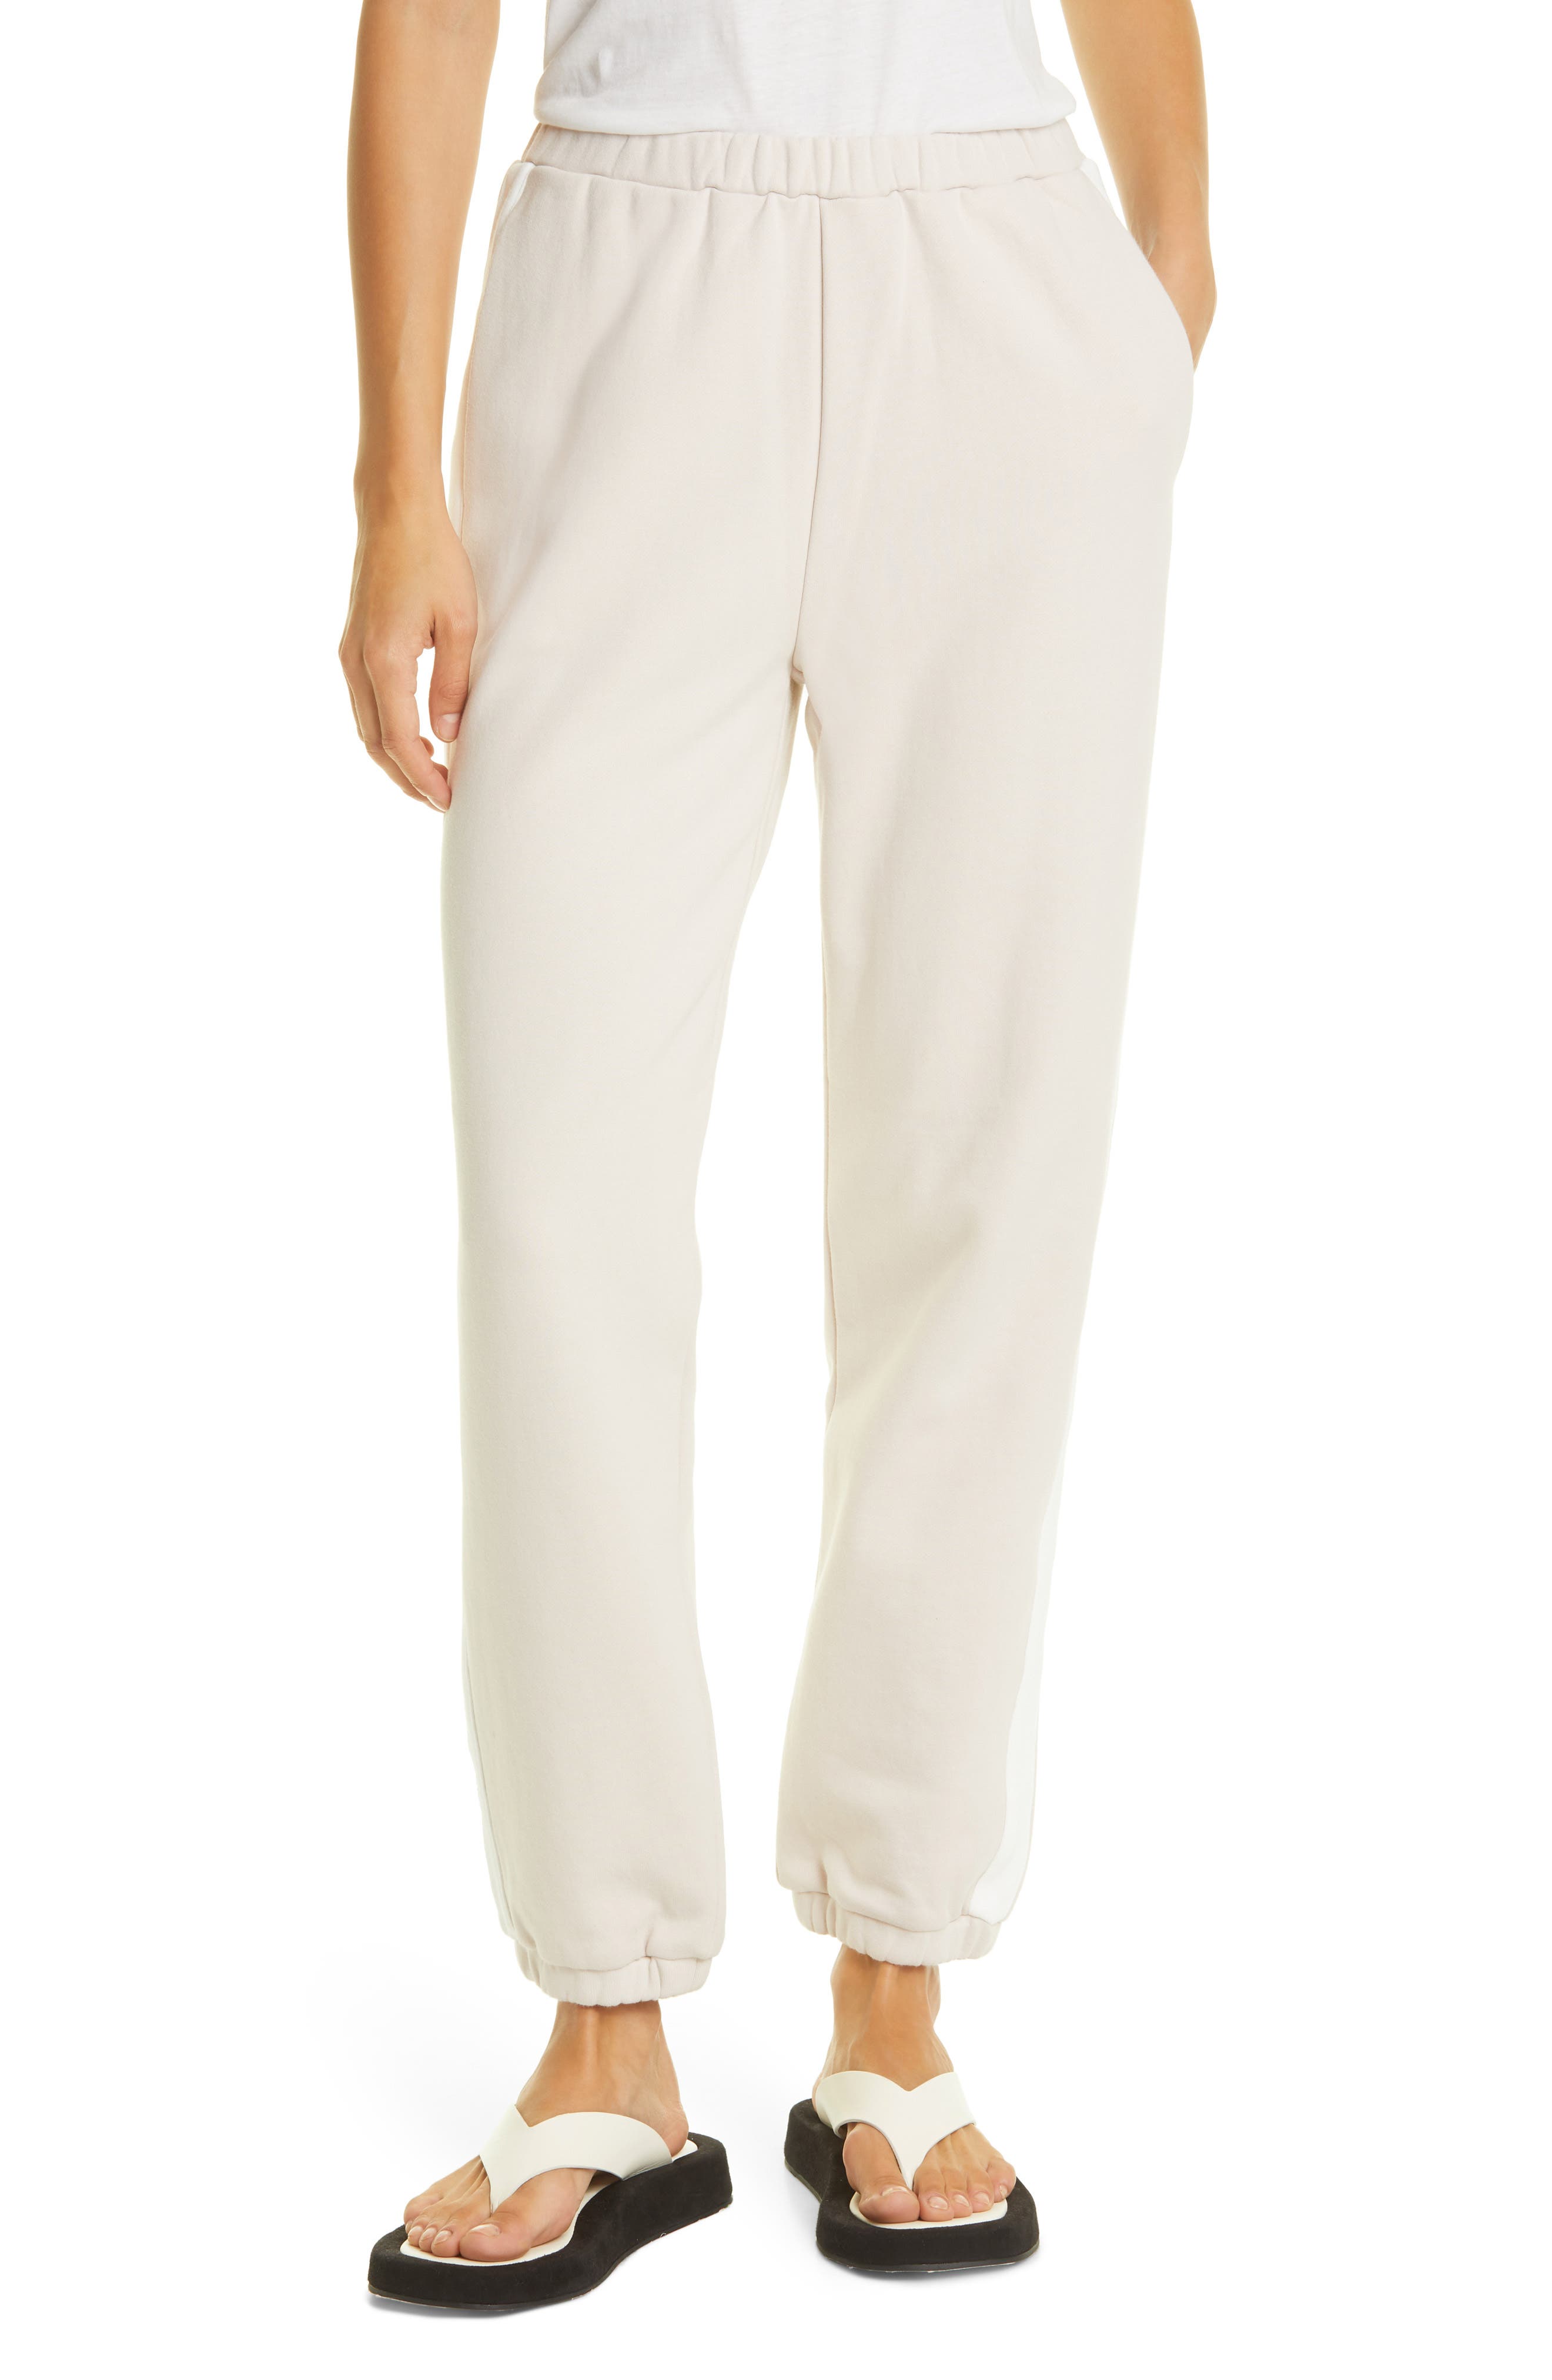 STAUD Cambrie Cotton Joggers in Crystal Grey/White at Nordstrom, Size X-Small